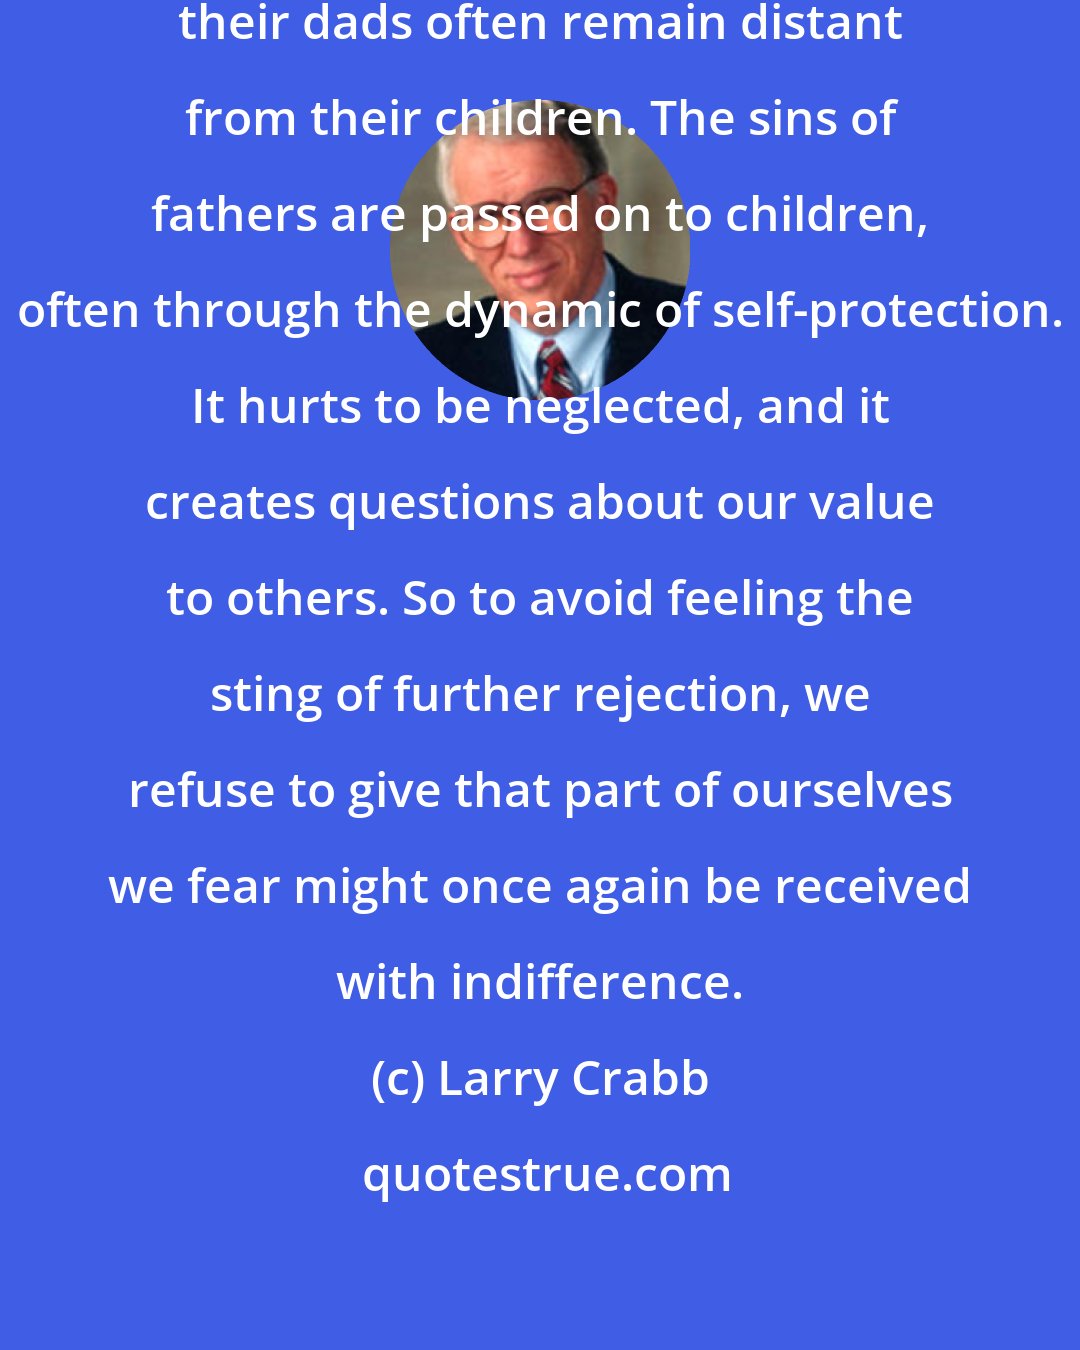 Larry Crabb: Men who as boys felt neglected by their dads often remain distant from their children. The sins of fathers are passed on to children, often through the dynamic of self-protection. It hurts to be neglected, and it creates questions about our value to others. So to avoid feeling the sting of further rejection, we refuse to give that part of ourselves we fear might once again be received with indifference.